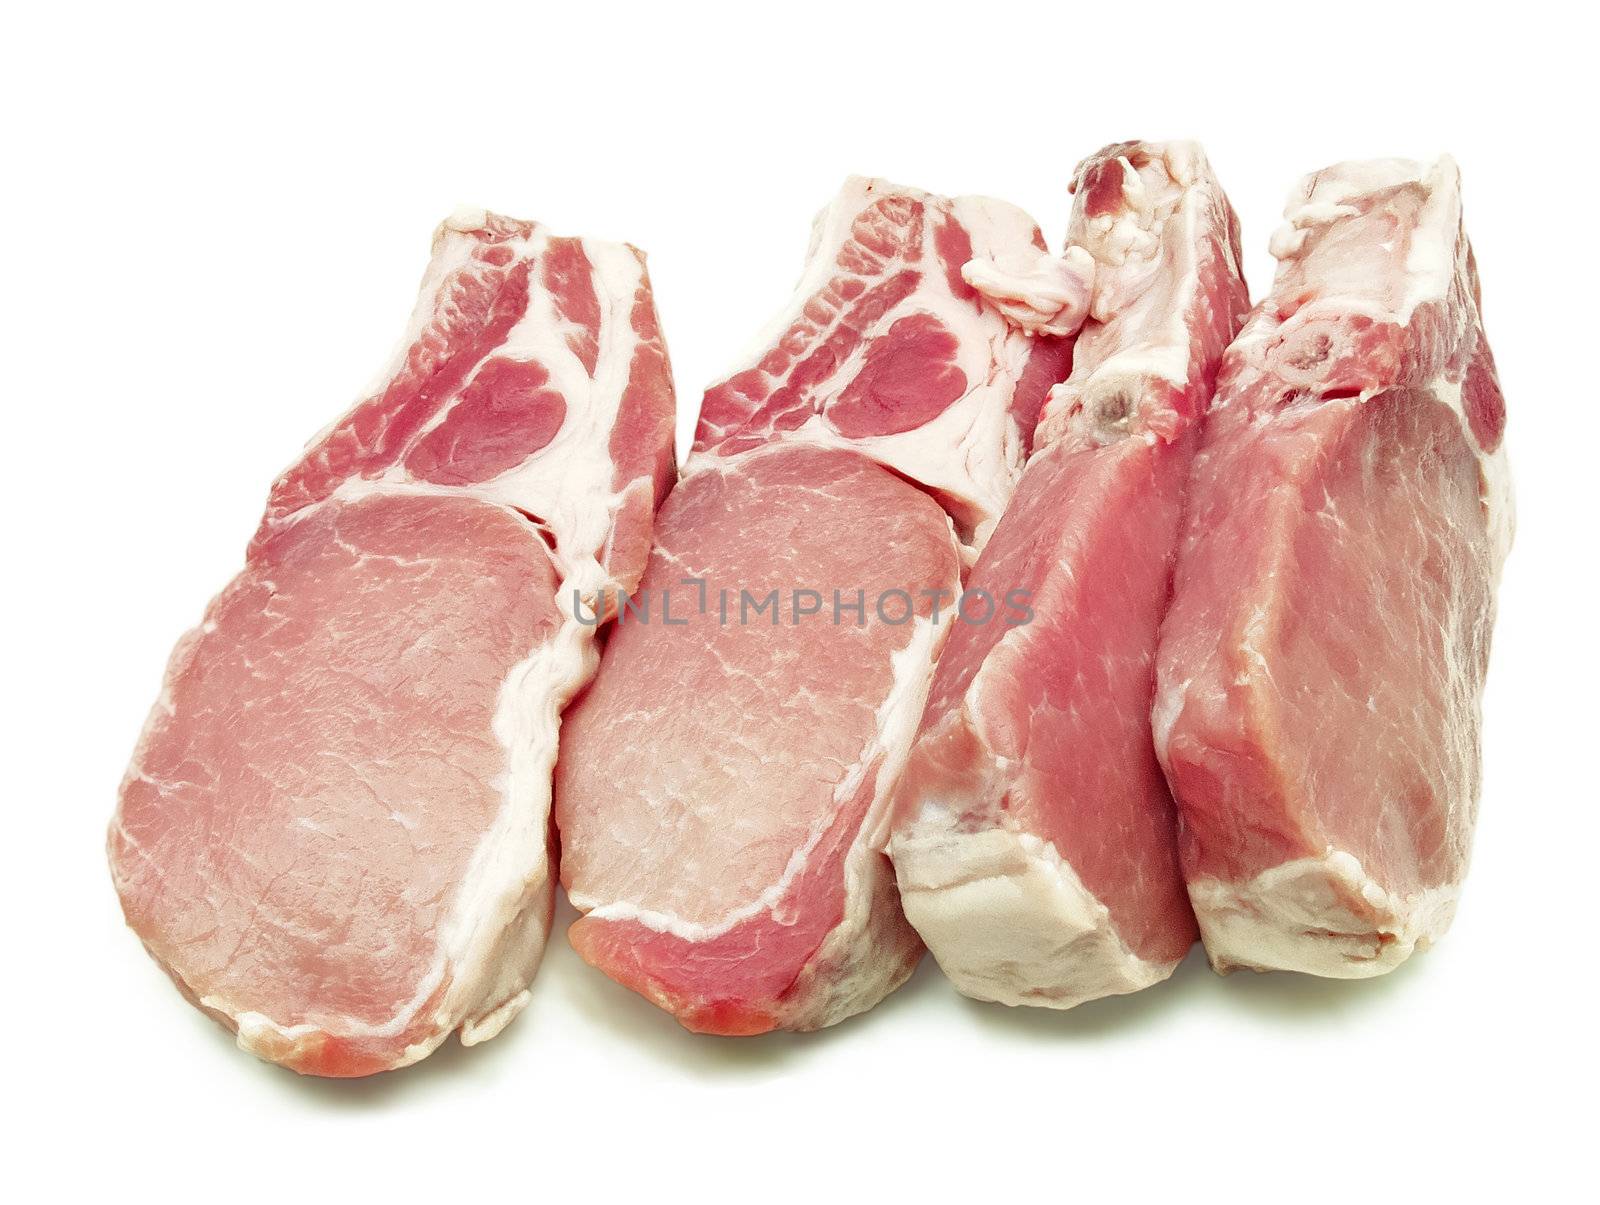 Some pork chops on a white background by NickNick